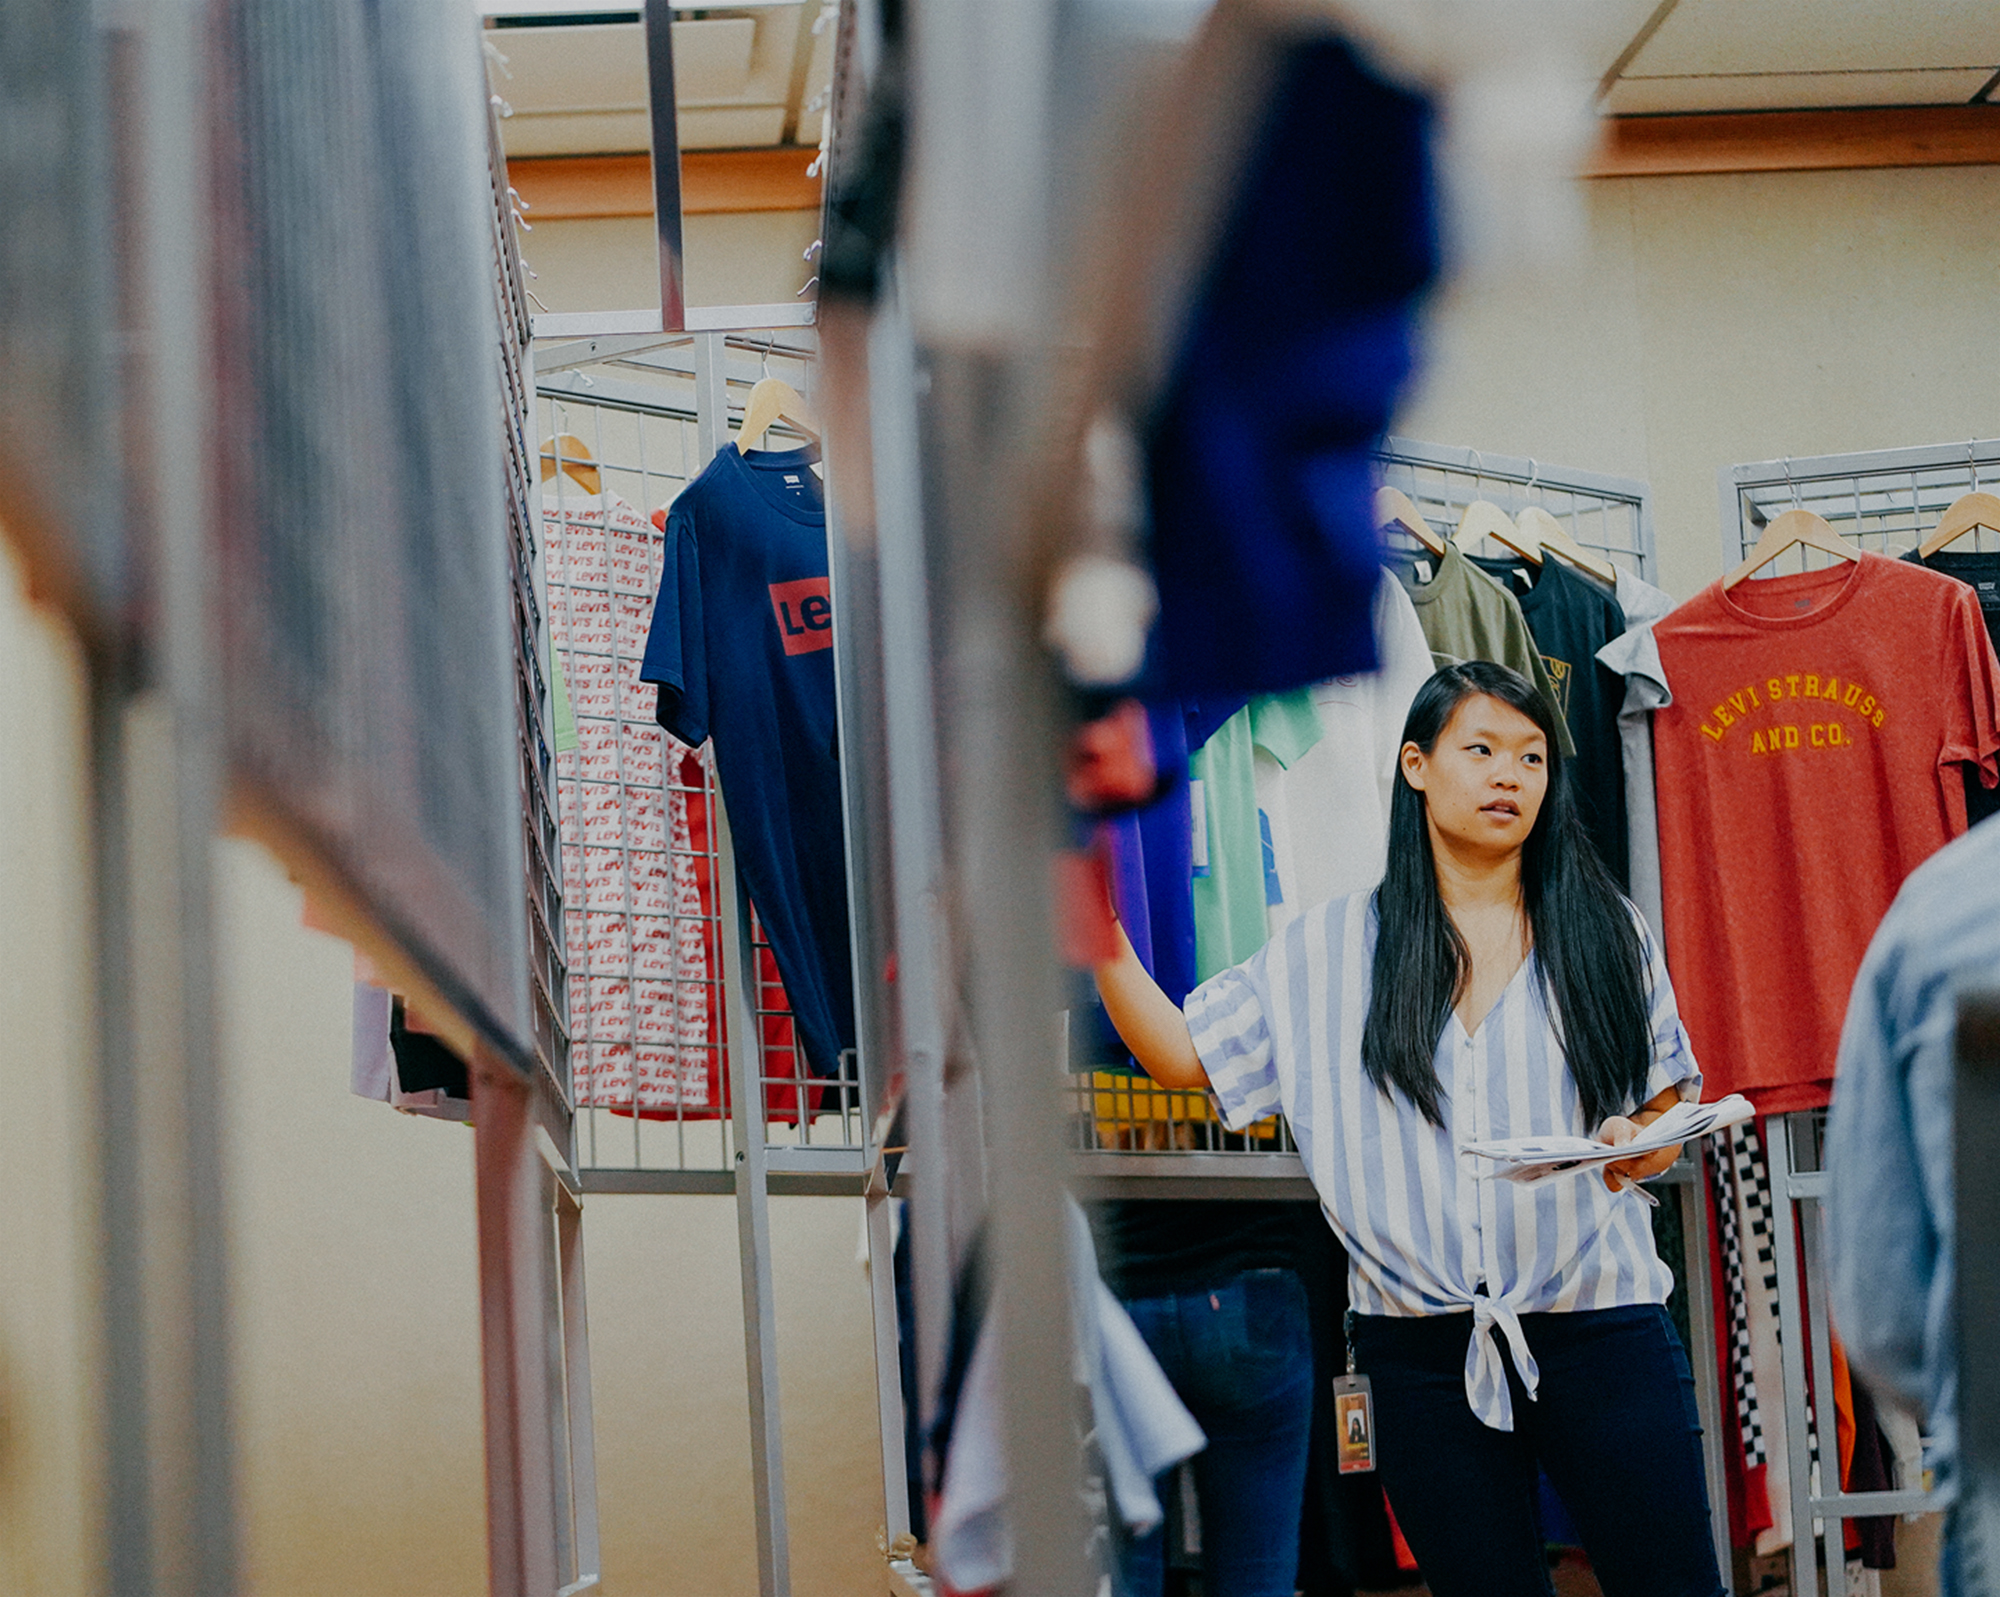 A person with long black hair and a blue and white vertical striped shirt stands next to clothing racks of Levi's® products. A blurred clothing rack is in the foreground.